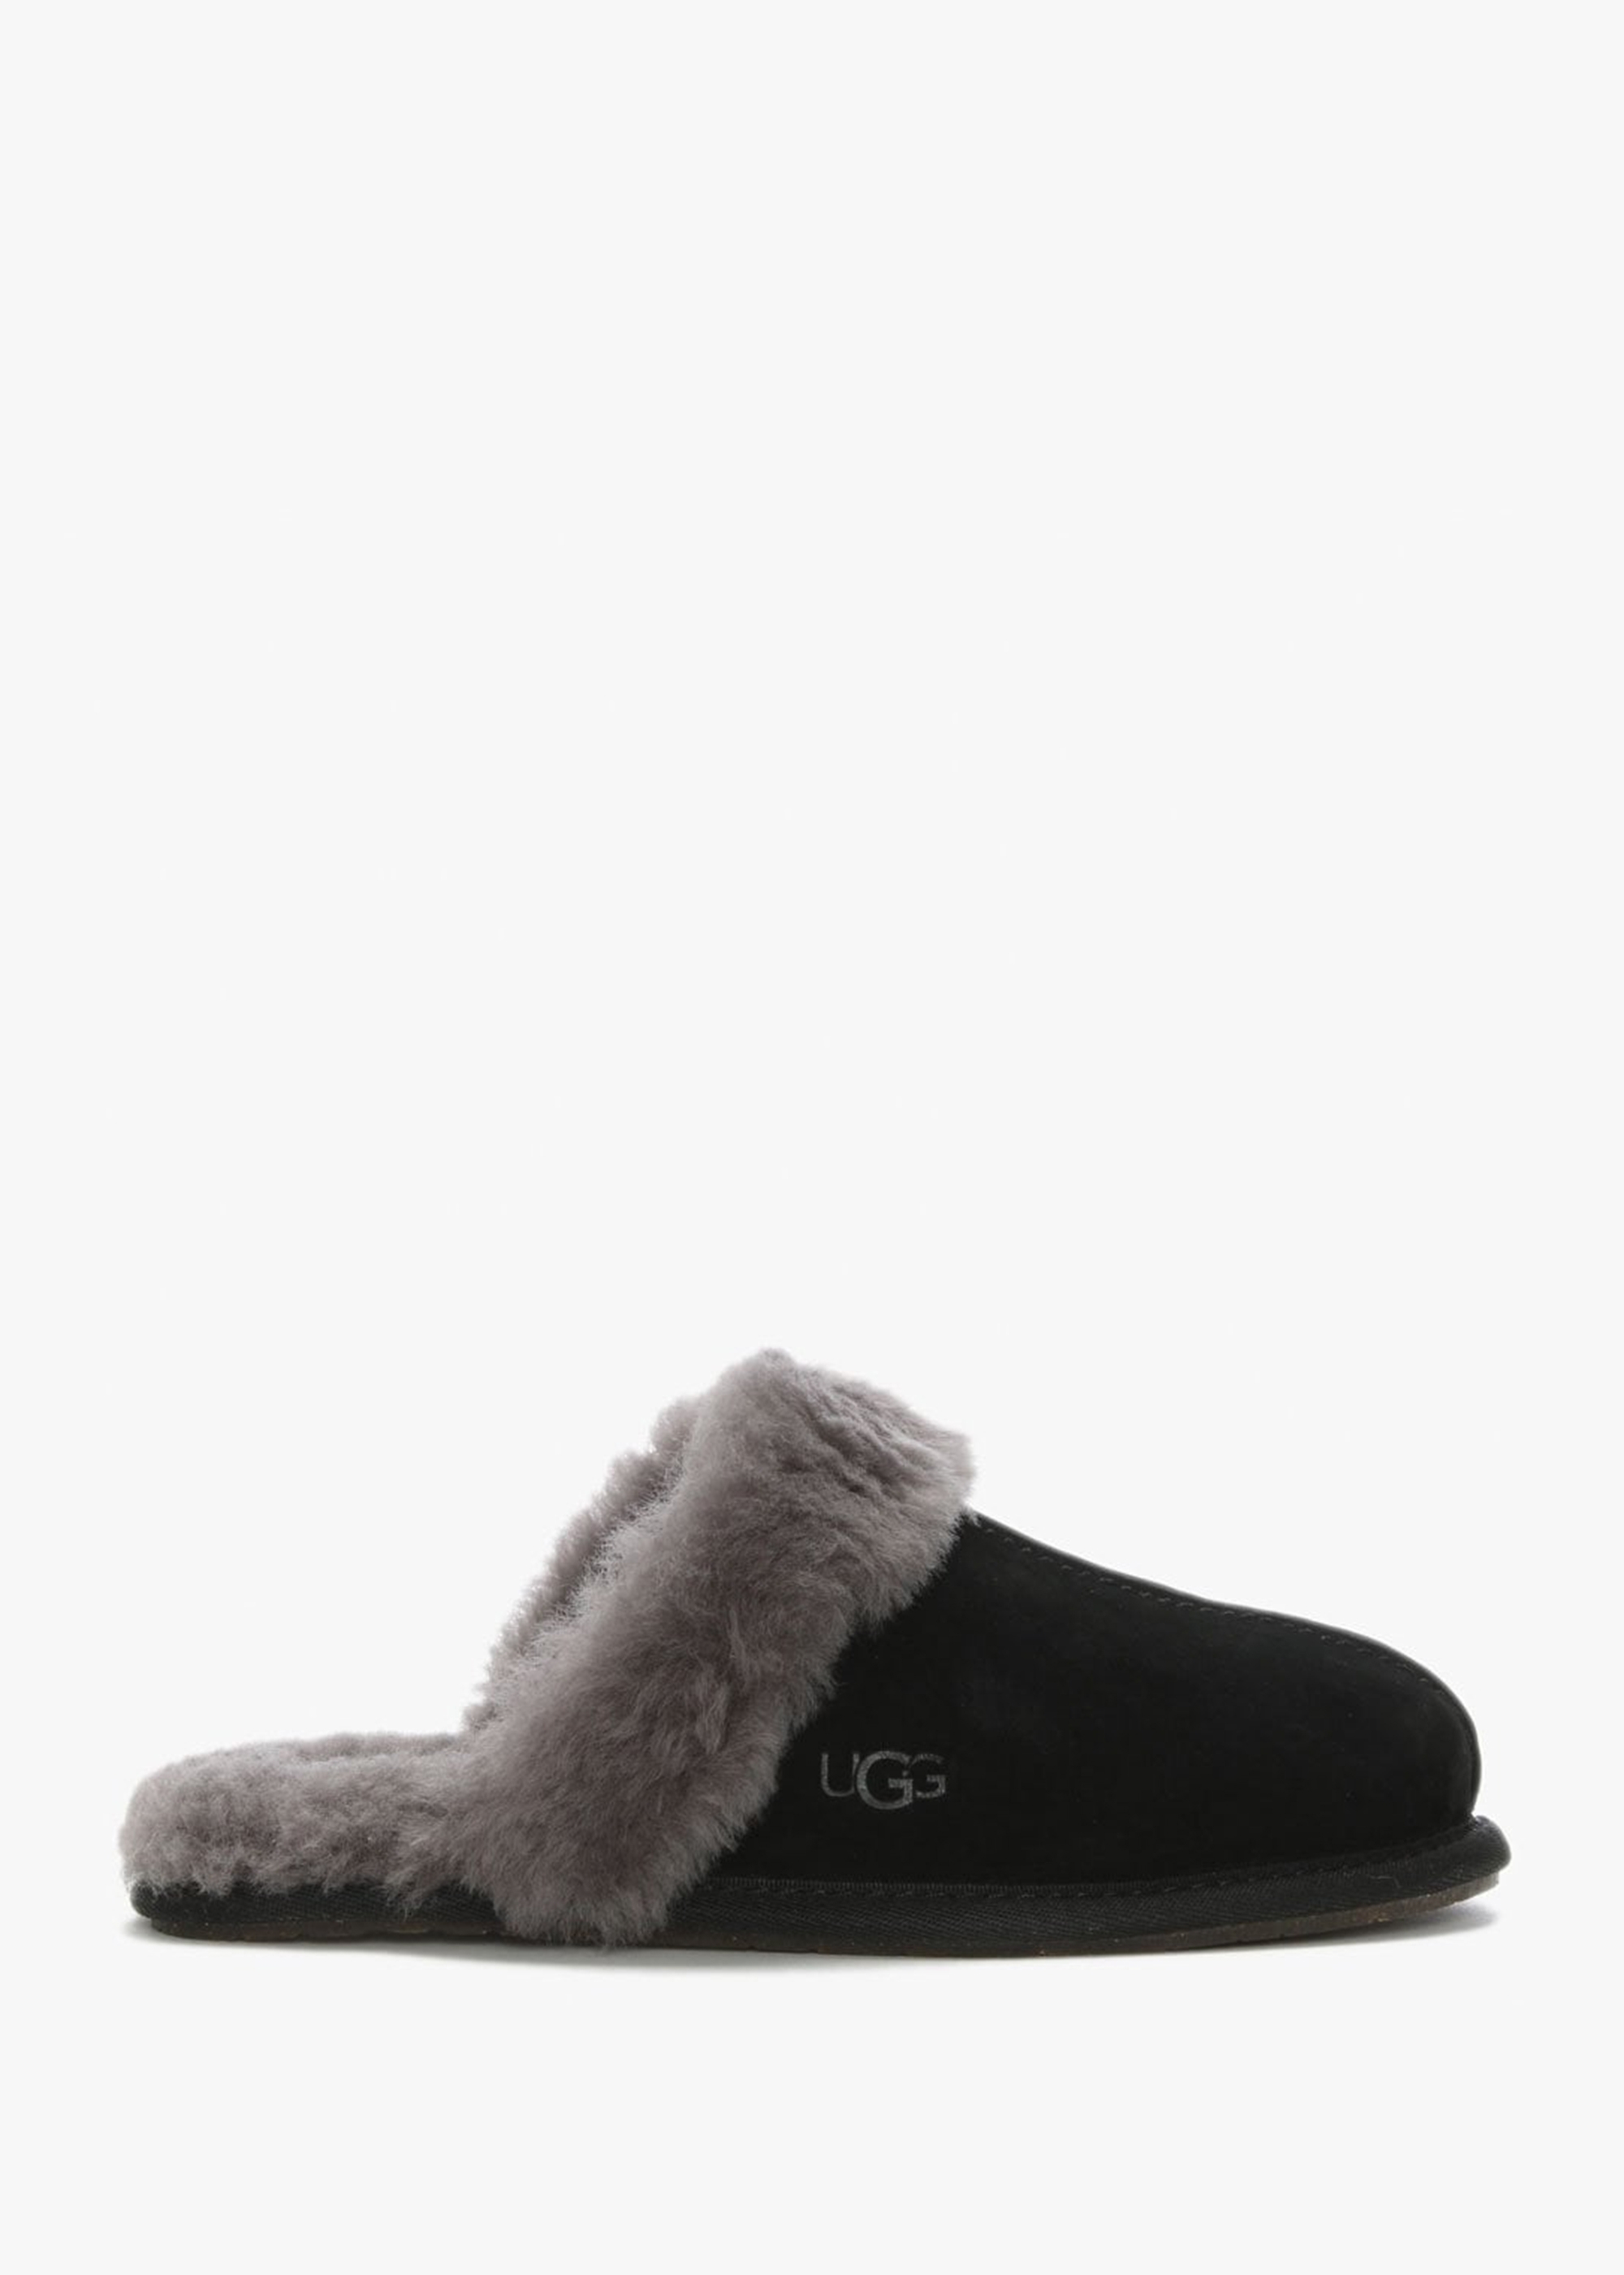 ugg-womens-scuffette-black-grey-suede-shearling-slippers